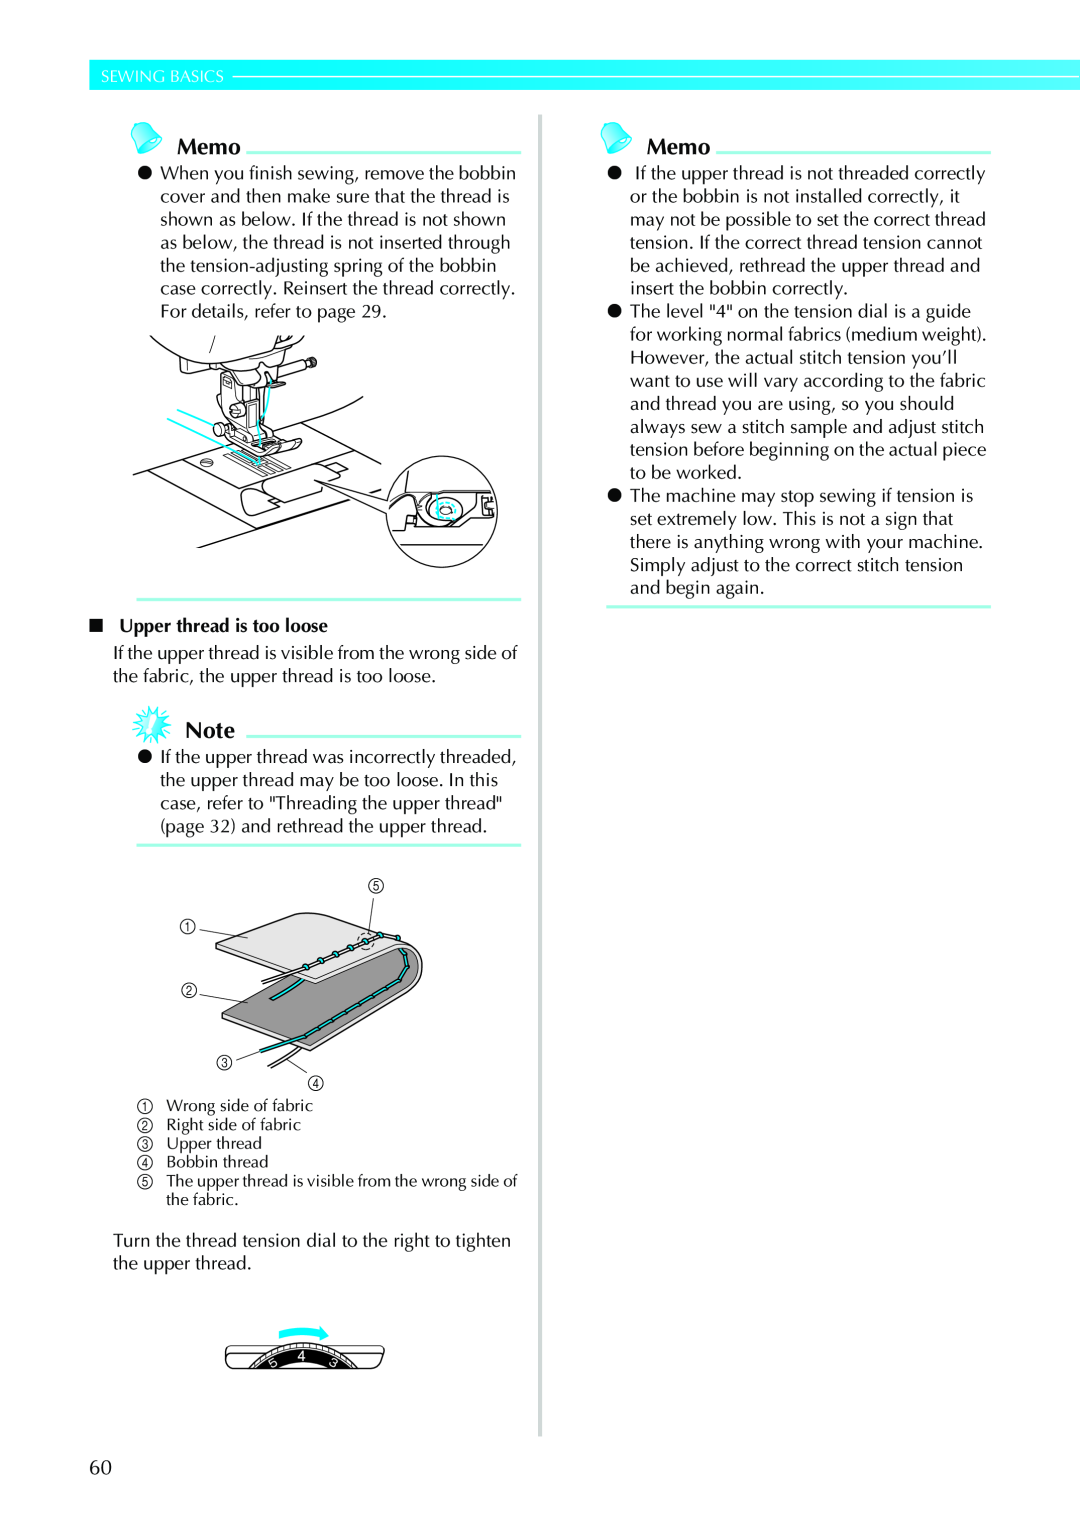 Brother 885-V33, 885-V31 operation manual Memo, Sewing Basics, Upper thread is too loose 